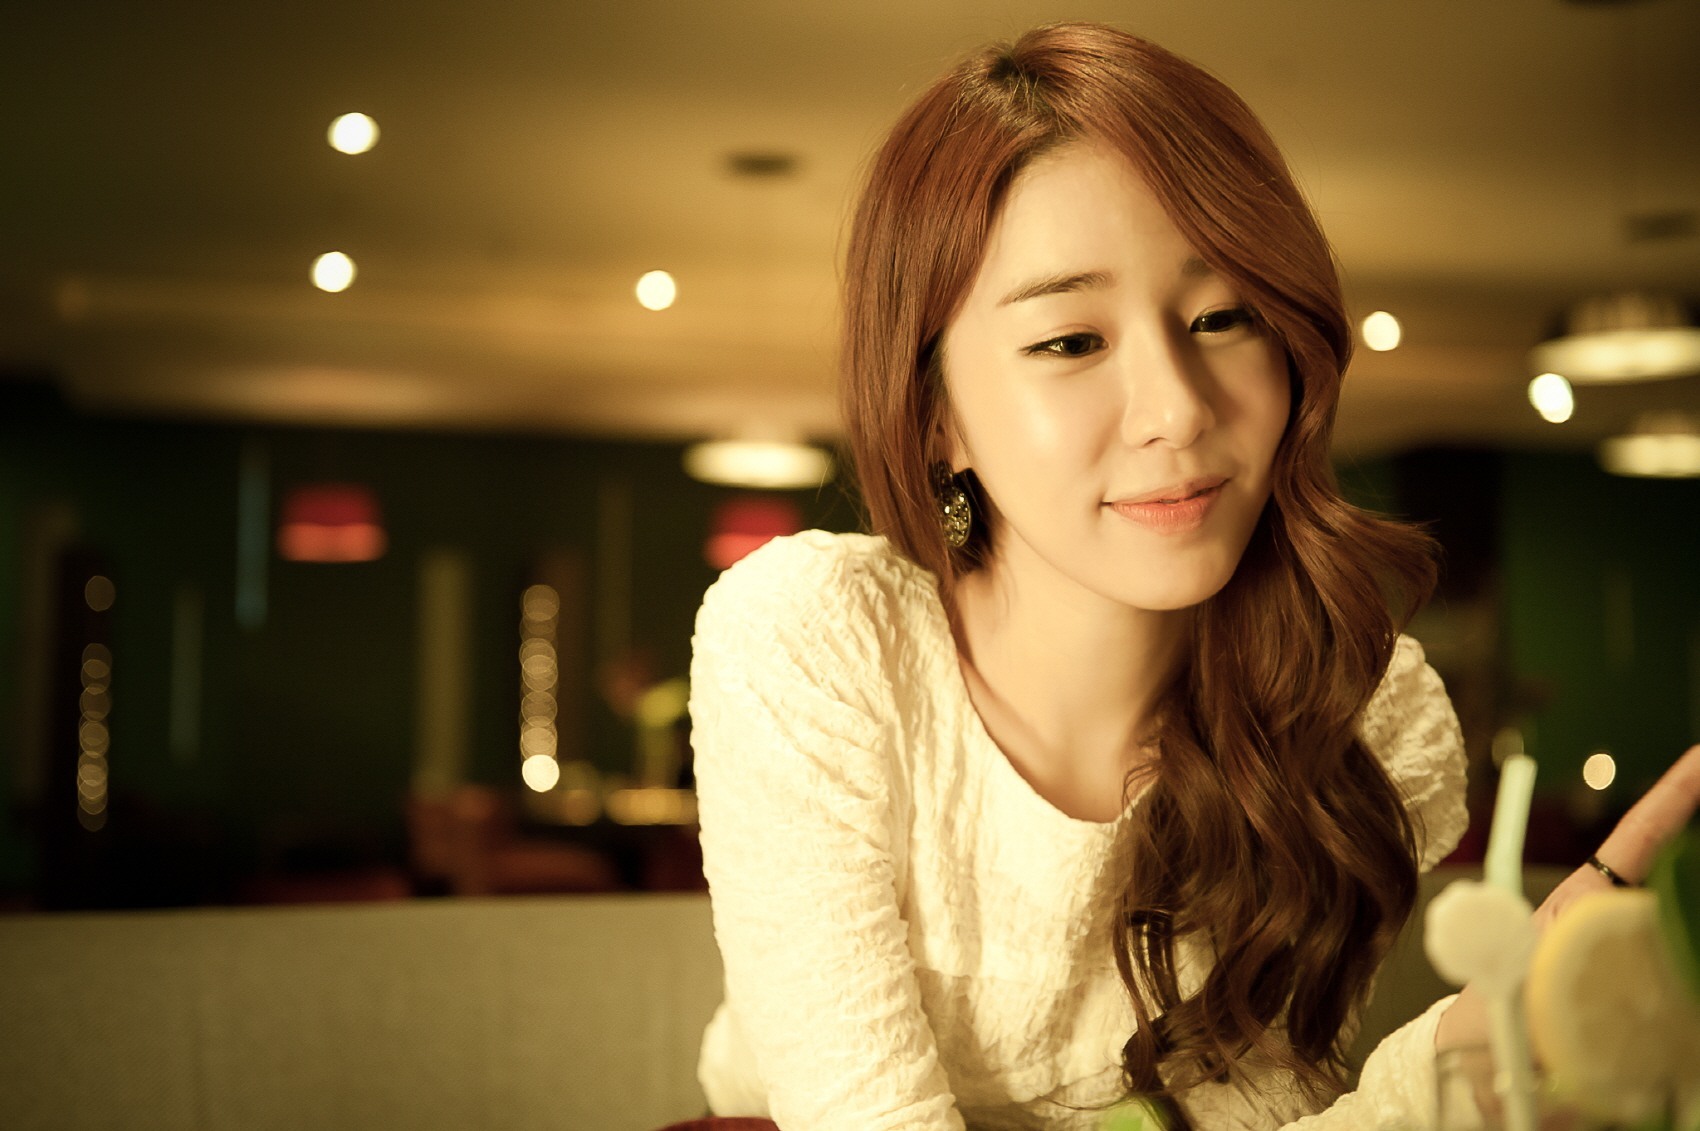 Yoo In-na Backgrounds, Compatible - PC, Mobile, Gadgets| 1700x1131 px